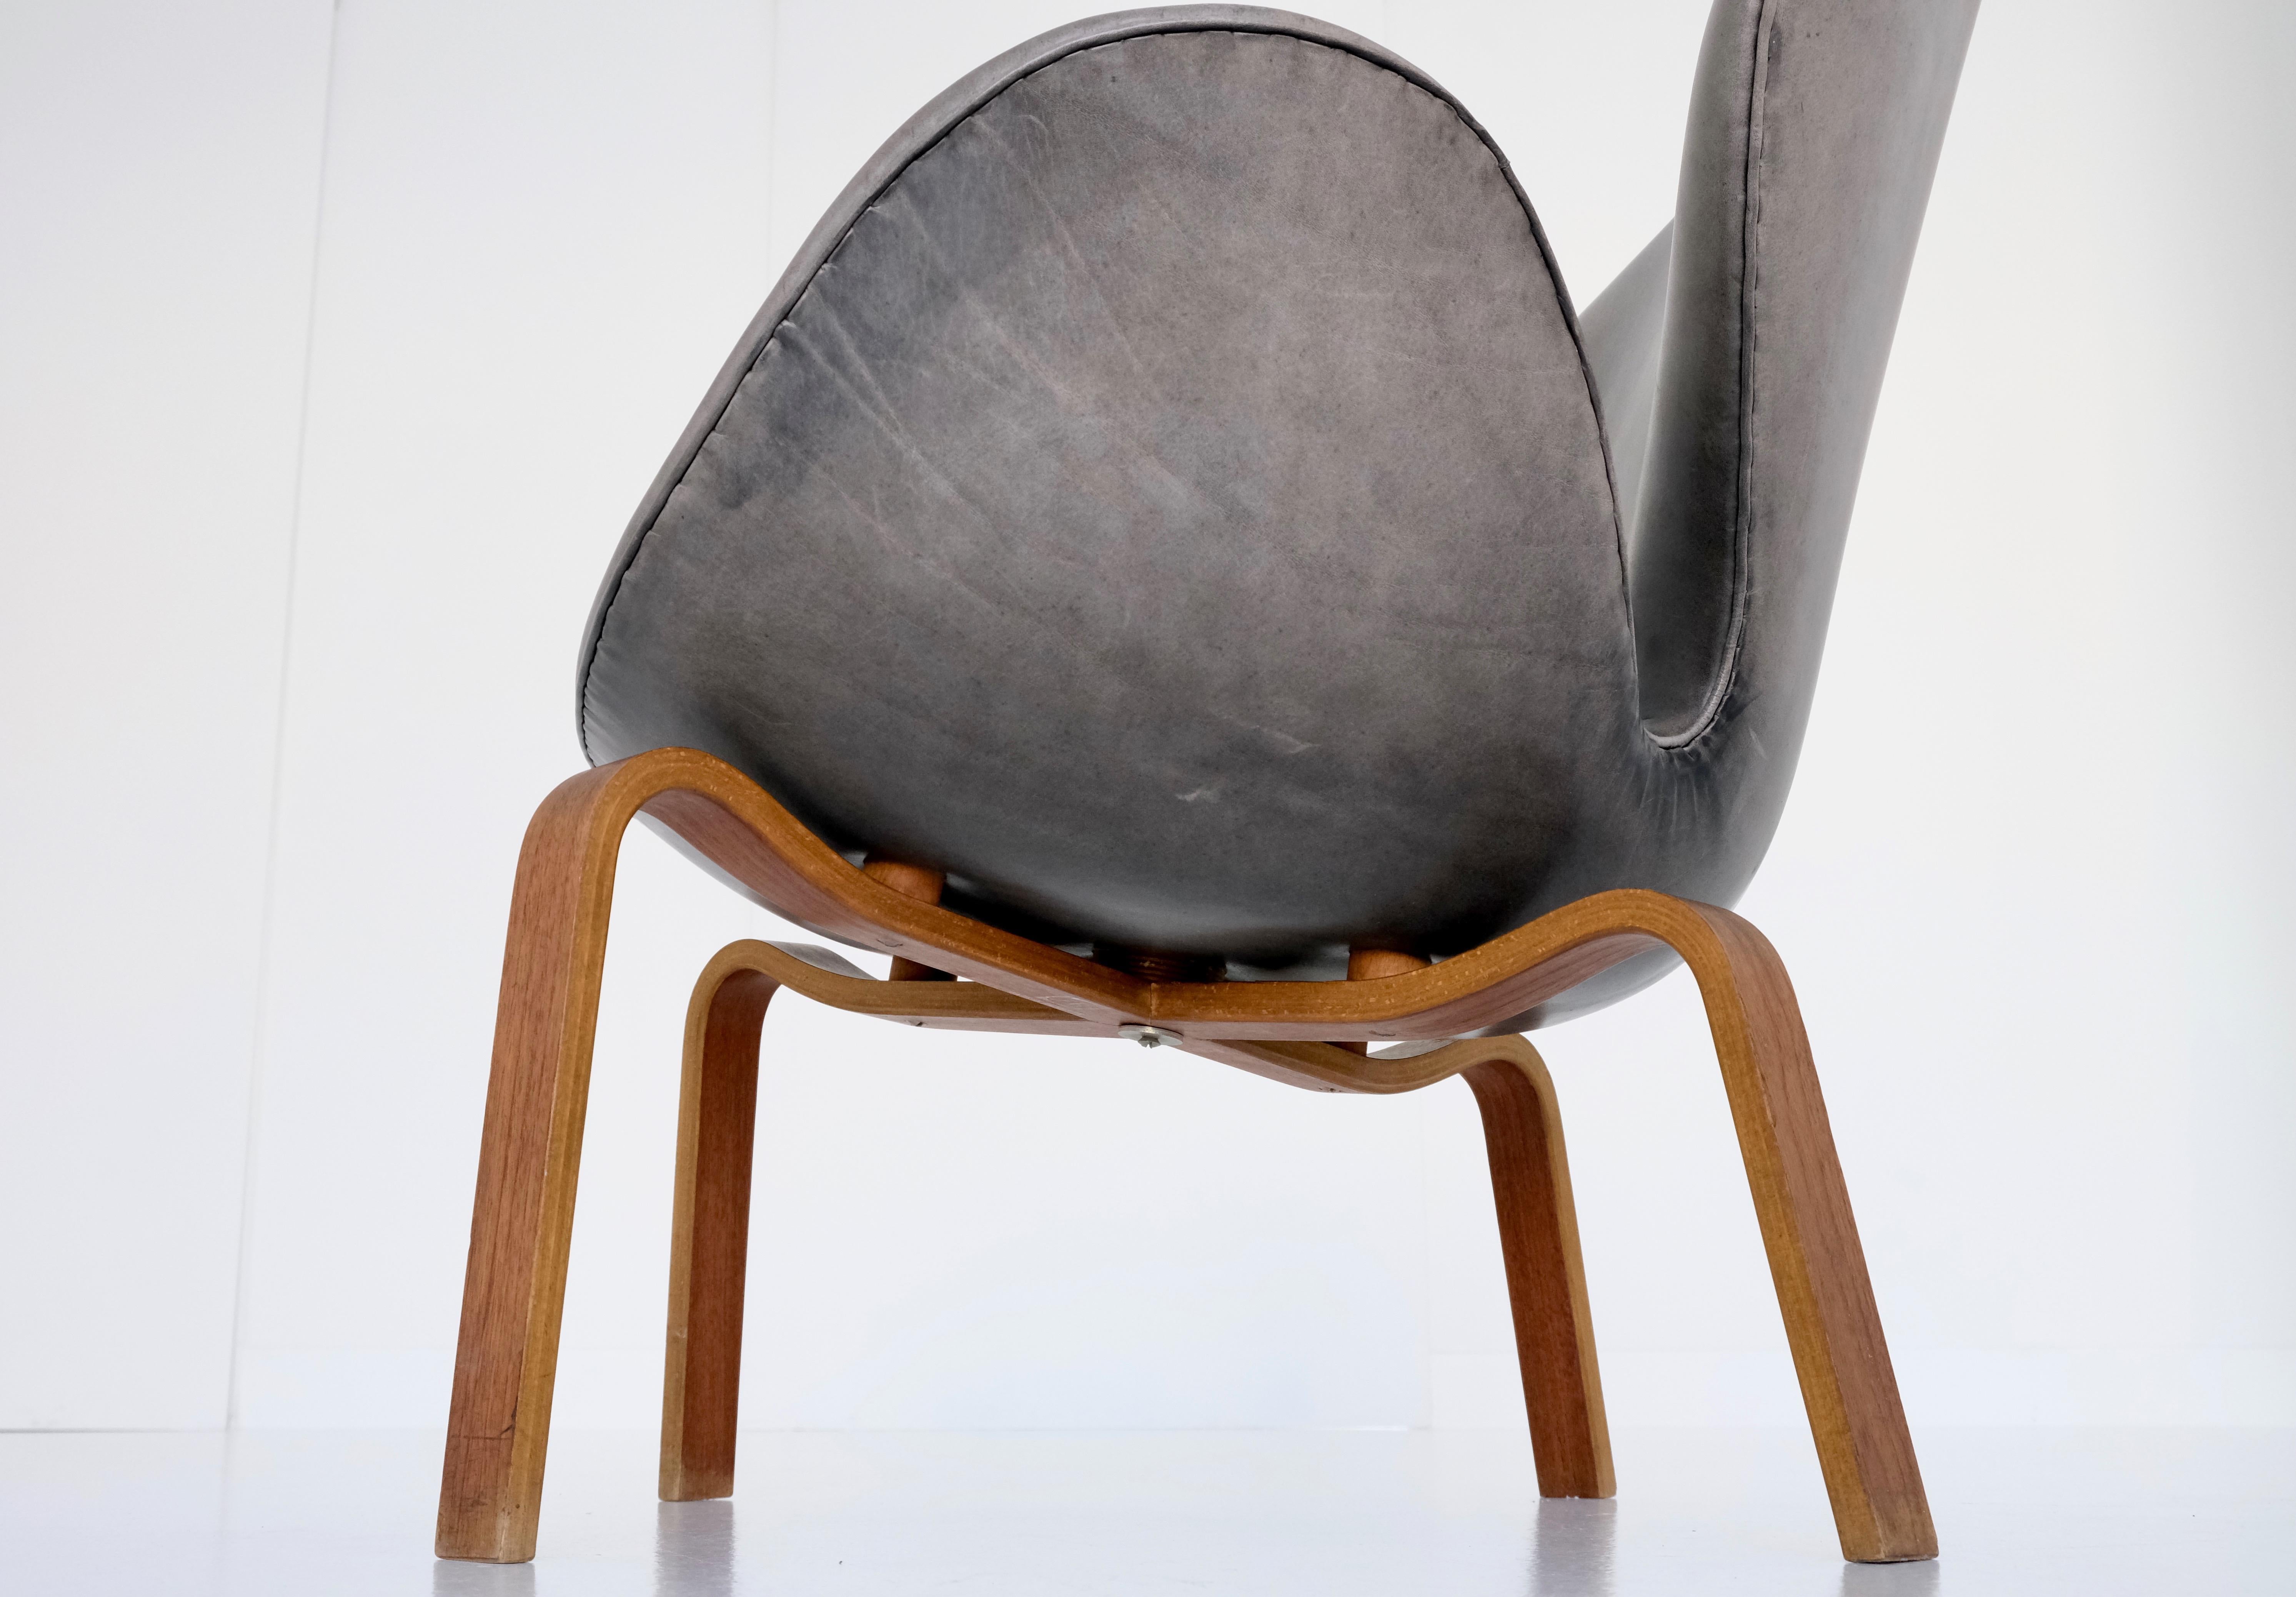 Mid-20th Century Swan Chair with Laminated Wooden Base, Arne Jacobsen for Fritz Hansen, 1958